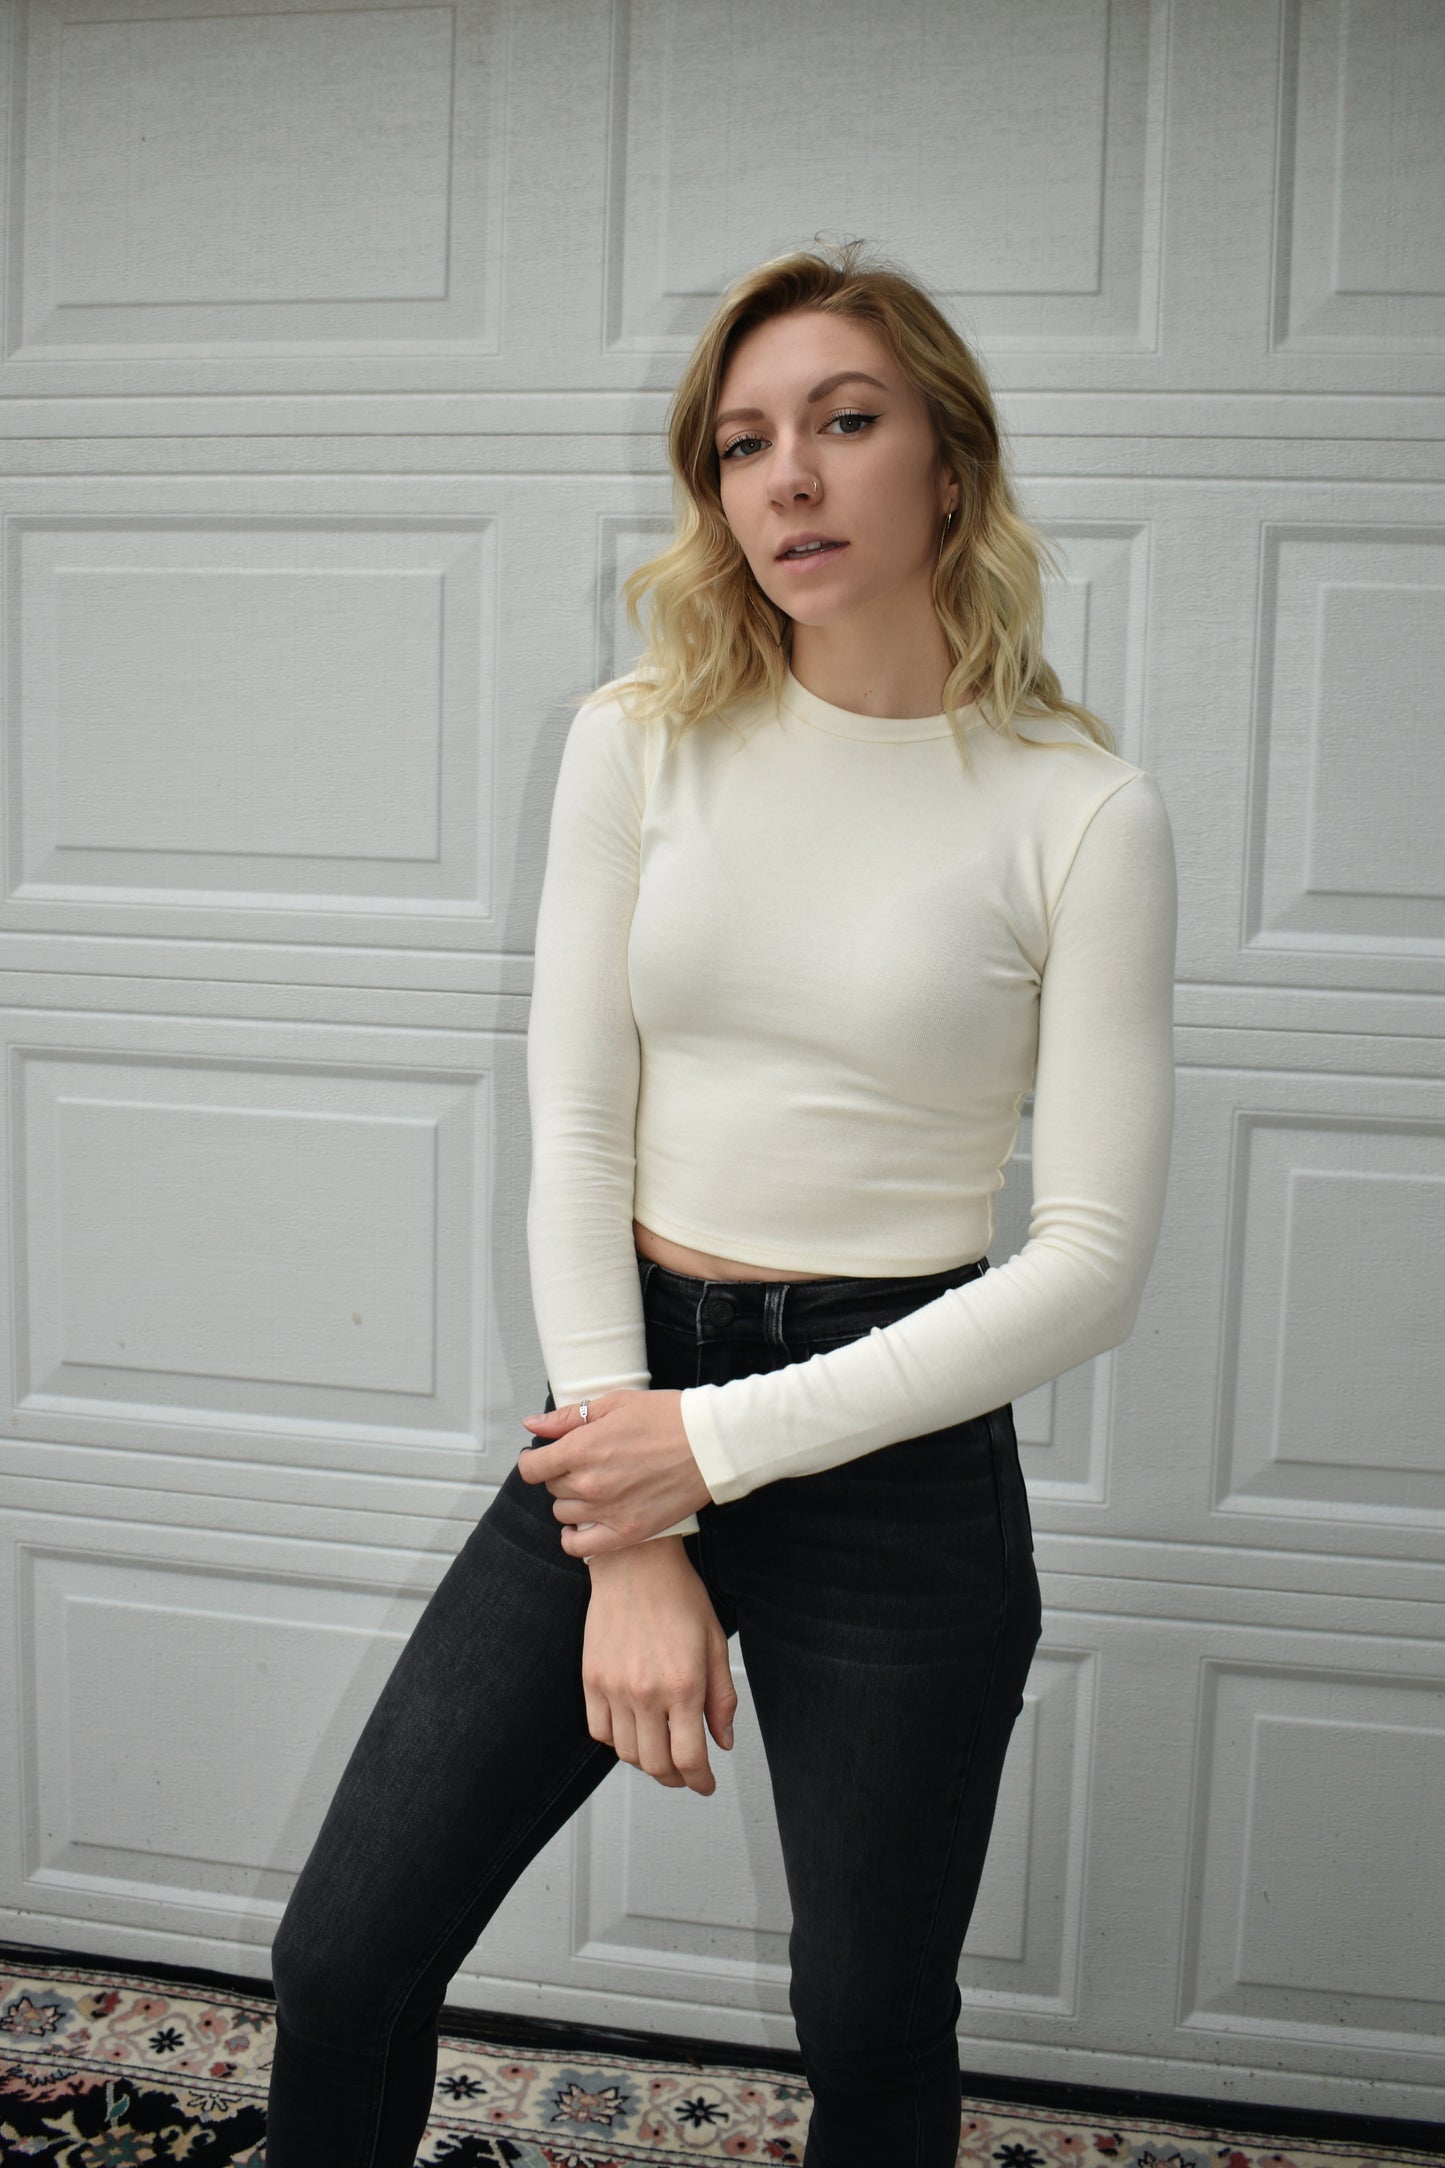 cream long steeve essential fitted cropped top with round neck. Stretchy, comfortable, the brand is Hyfve.